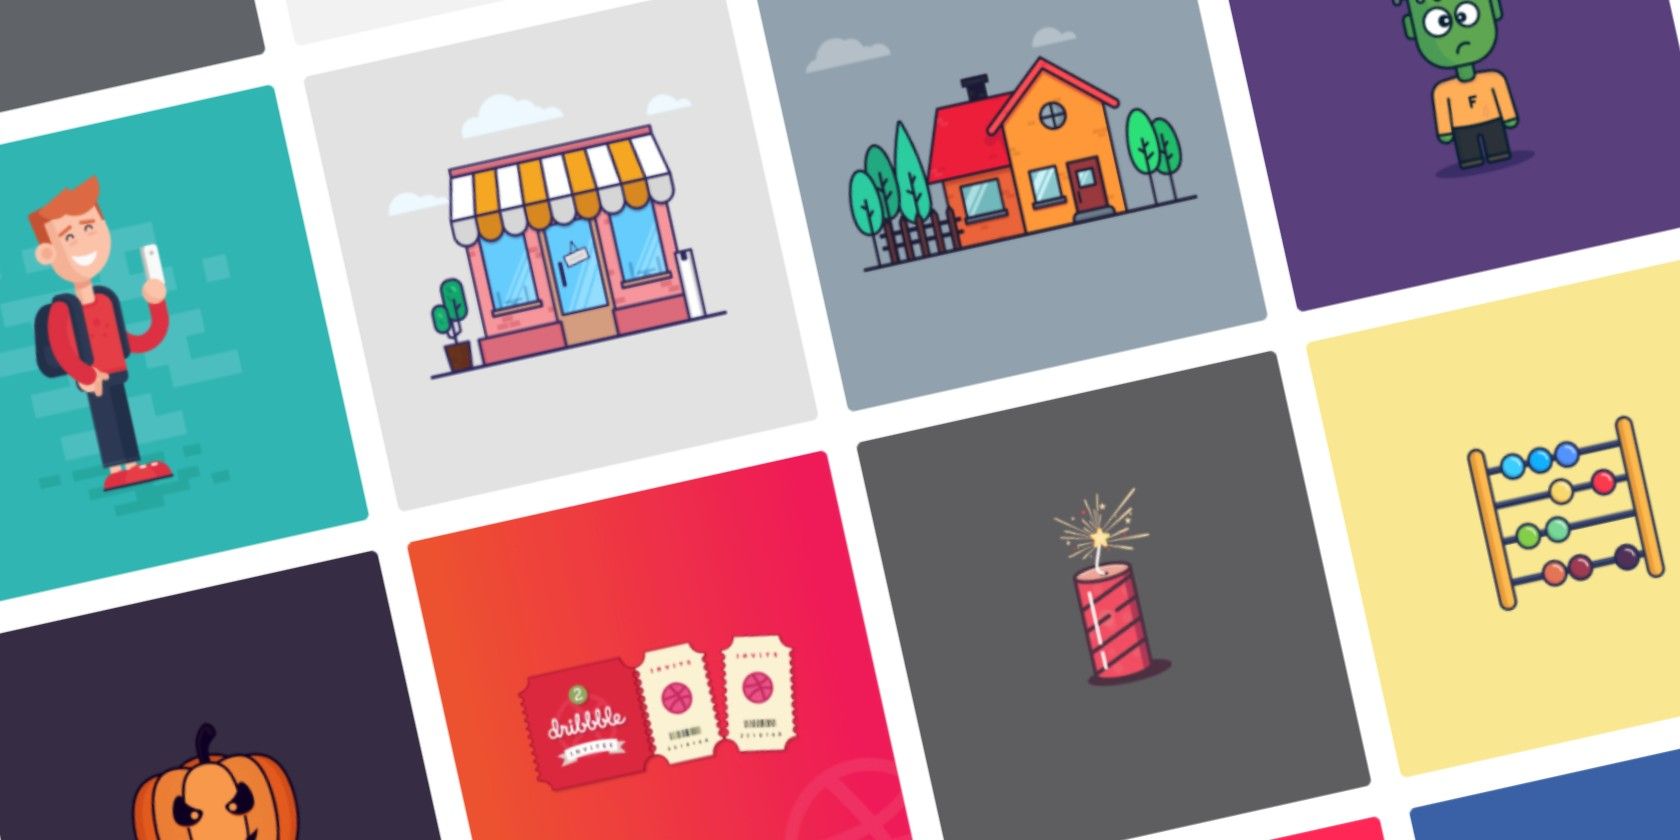 royalty free illustrations free download